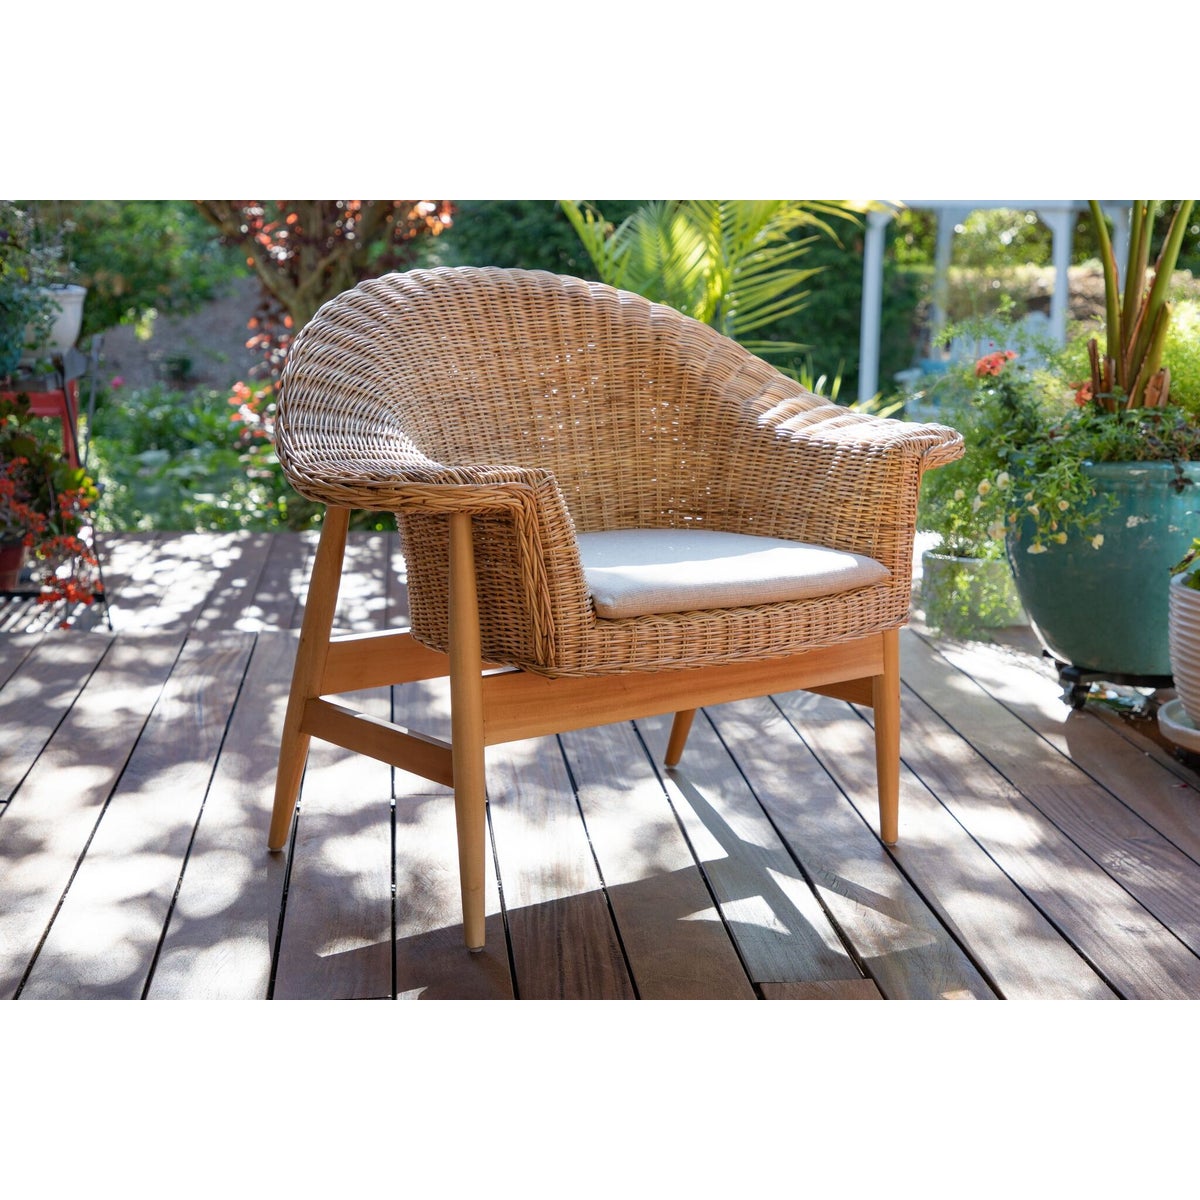 CLOSE-OUT!!Mystic Chair Mindi Frame Color - Natural Cushion Color - Cream 50% OFF!This Item Wi